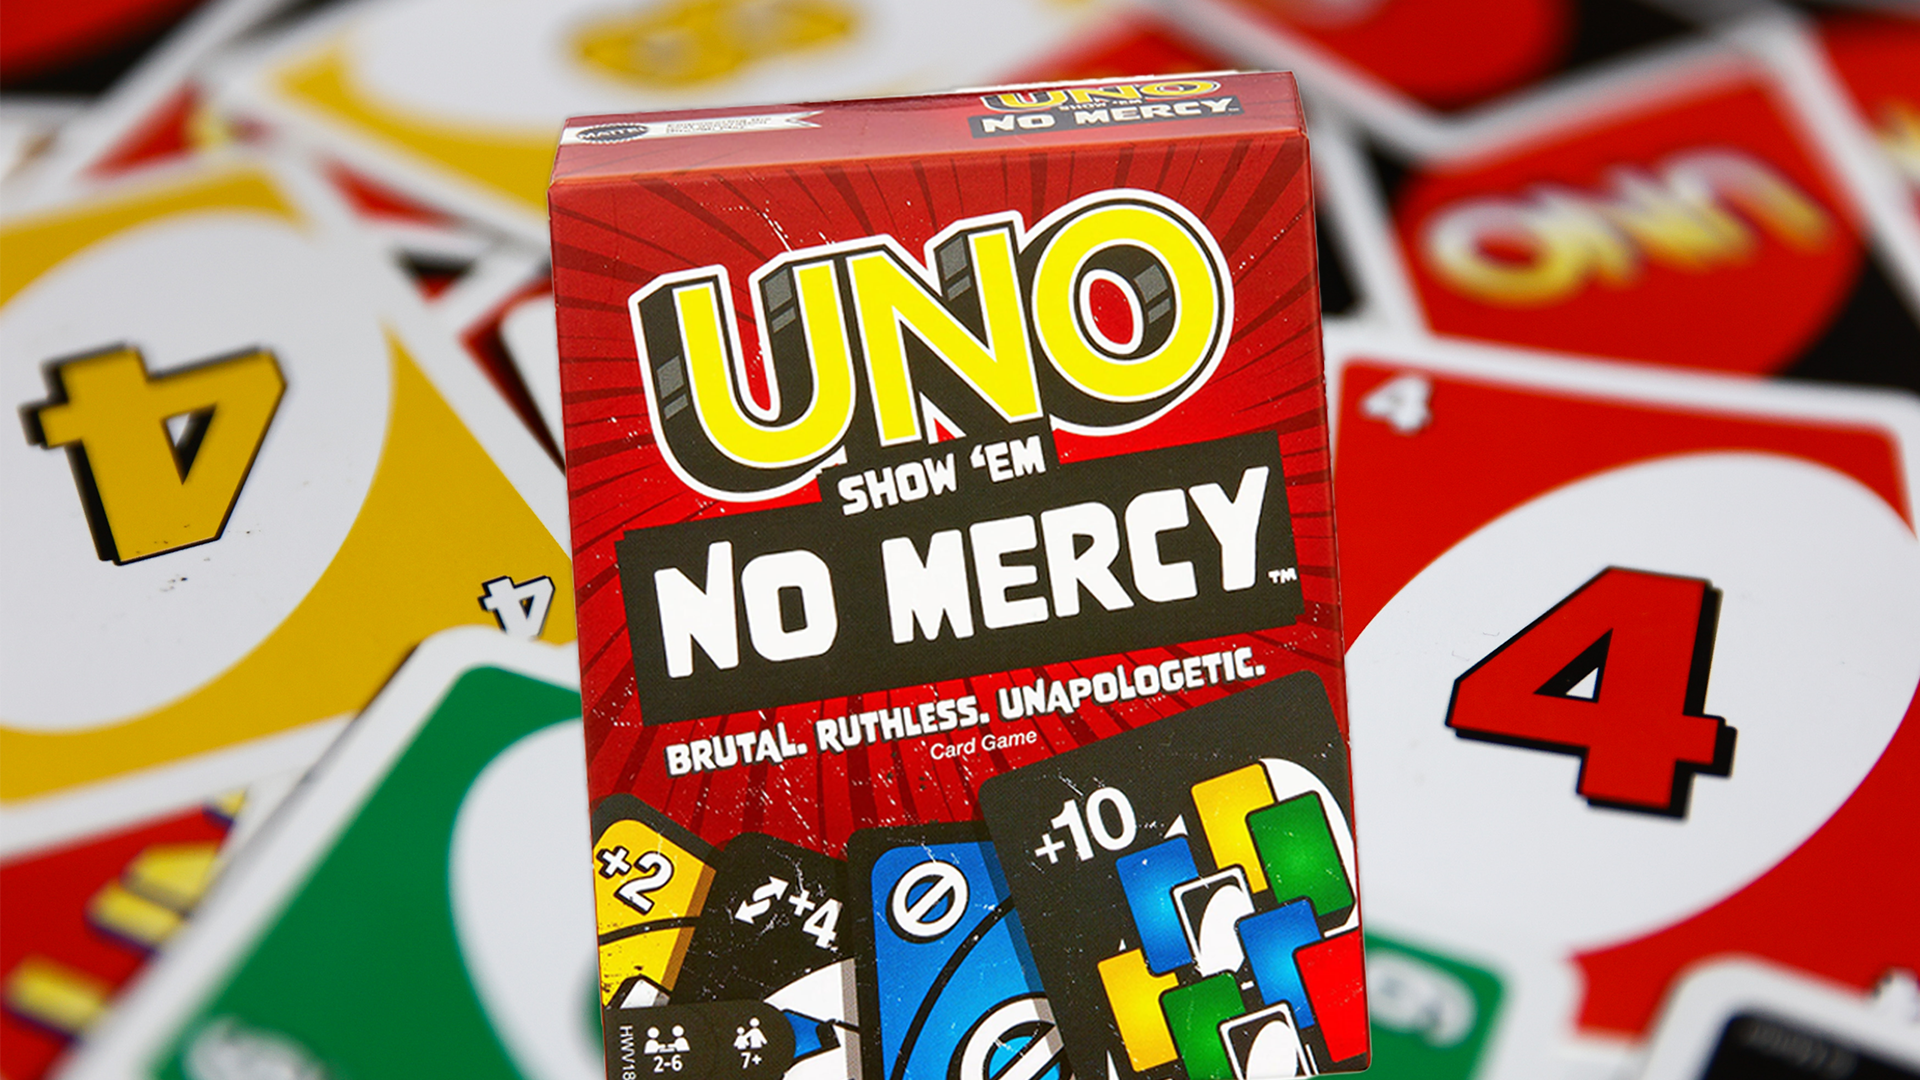 UNO No Mercy T-Shirt - Board Games Collection